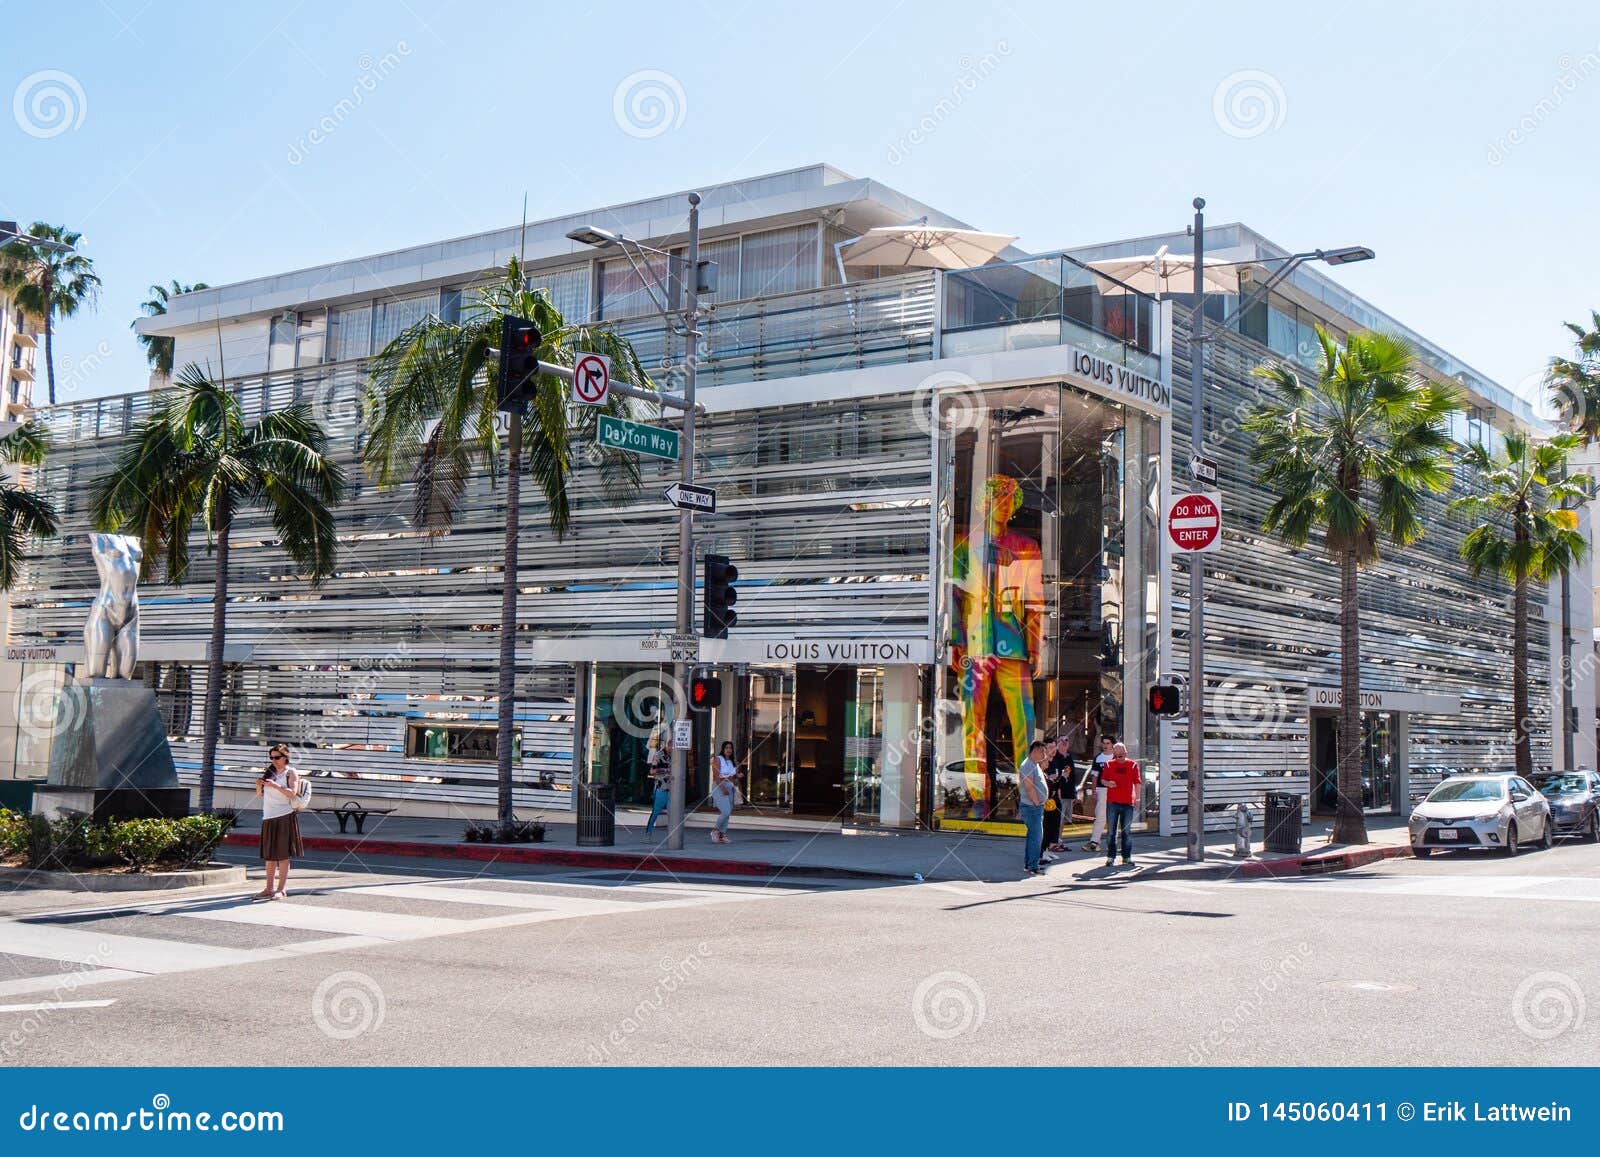 Louis Vuitton Store at Rodeo Drive in Beverly Hills - CALIFORNIA, USA ...